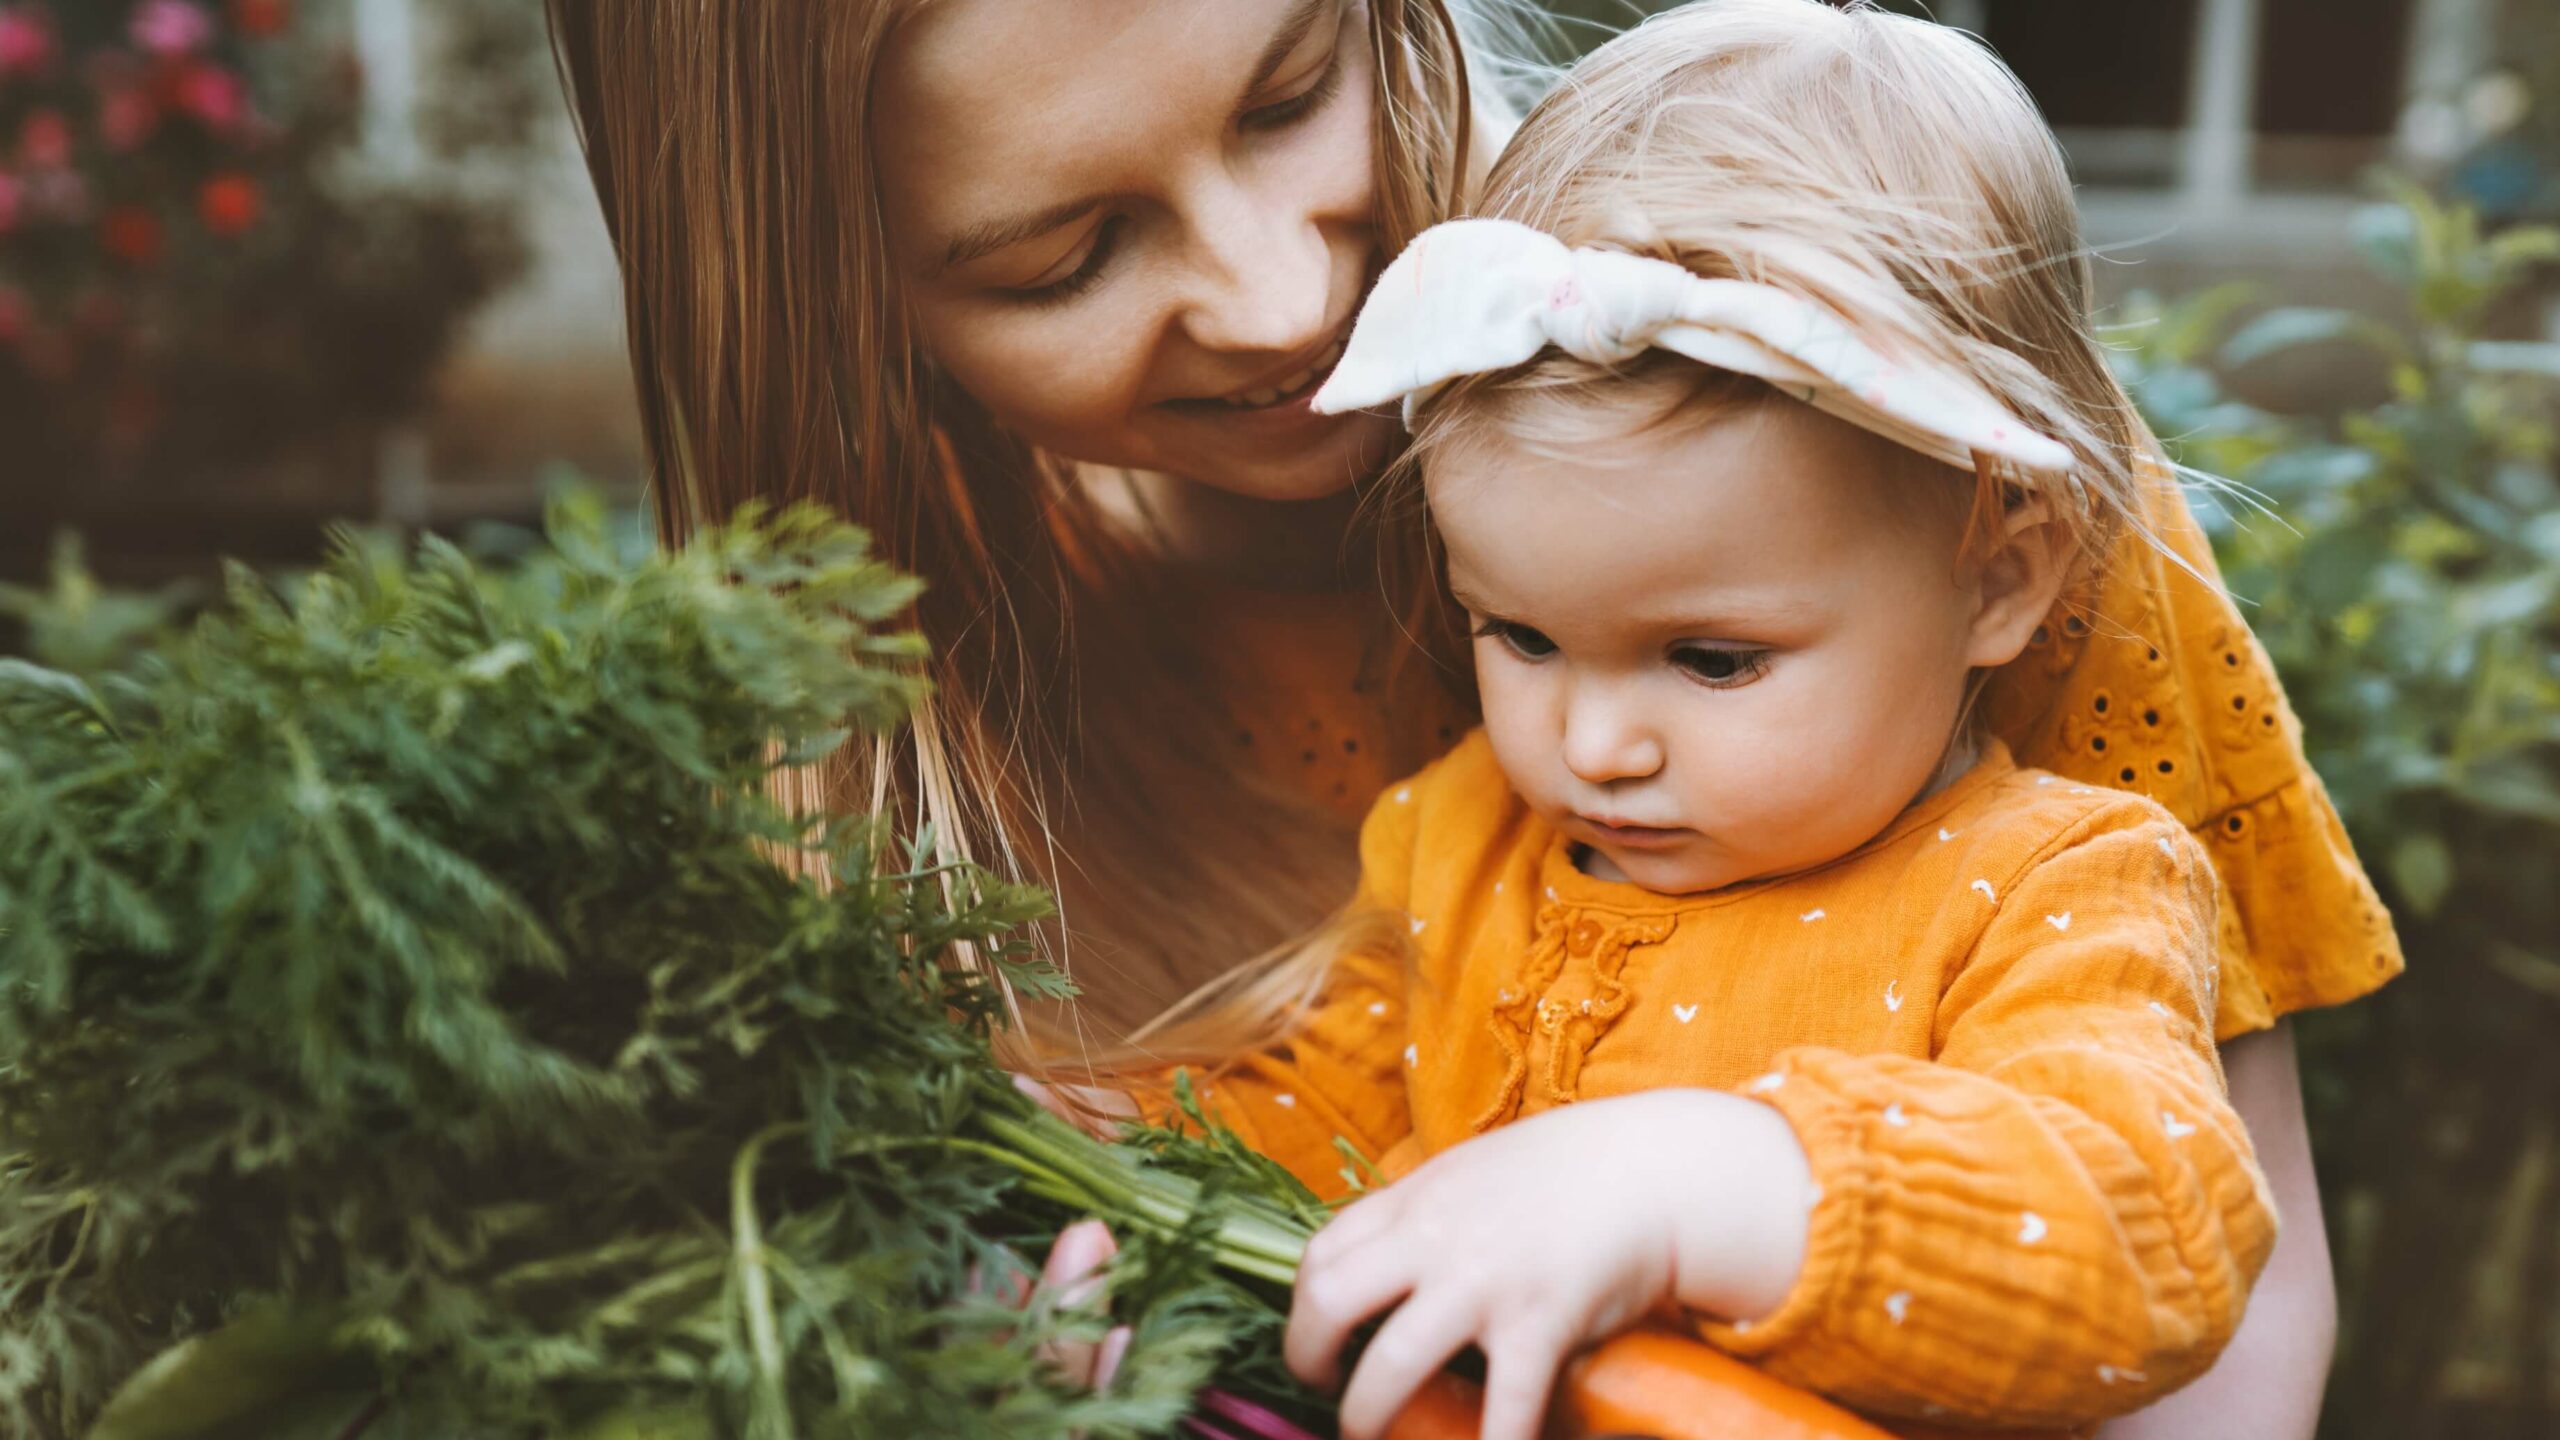 A mum and baby pick vegetables